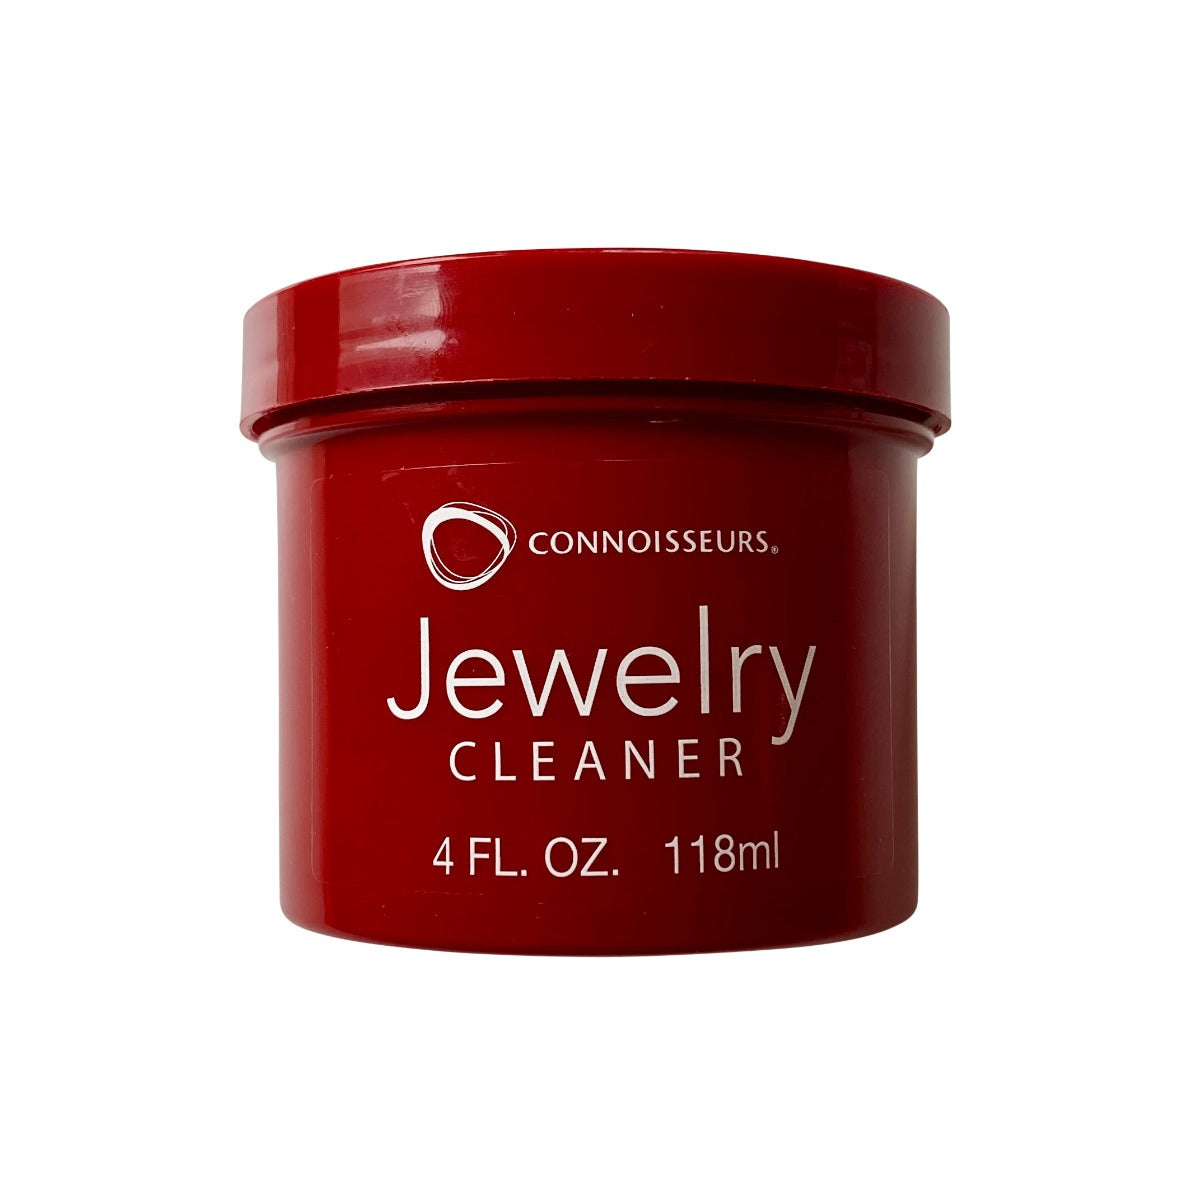 The best silver cleaner Connoisseurs for jewelry 